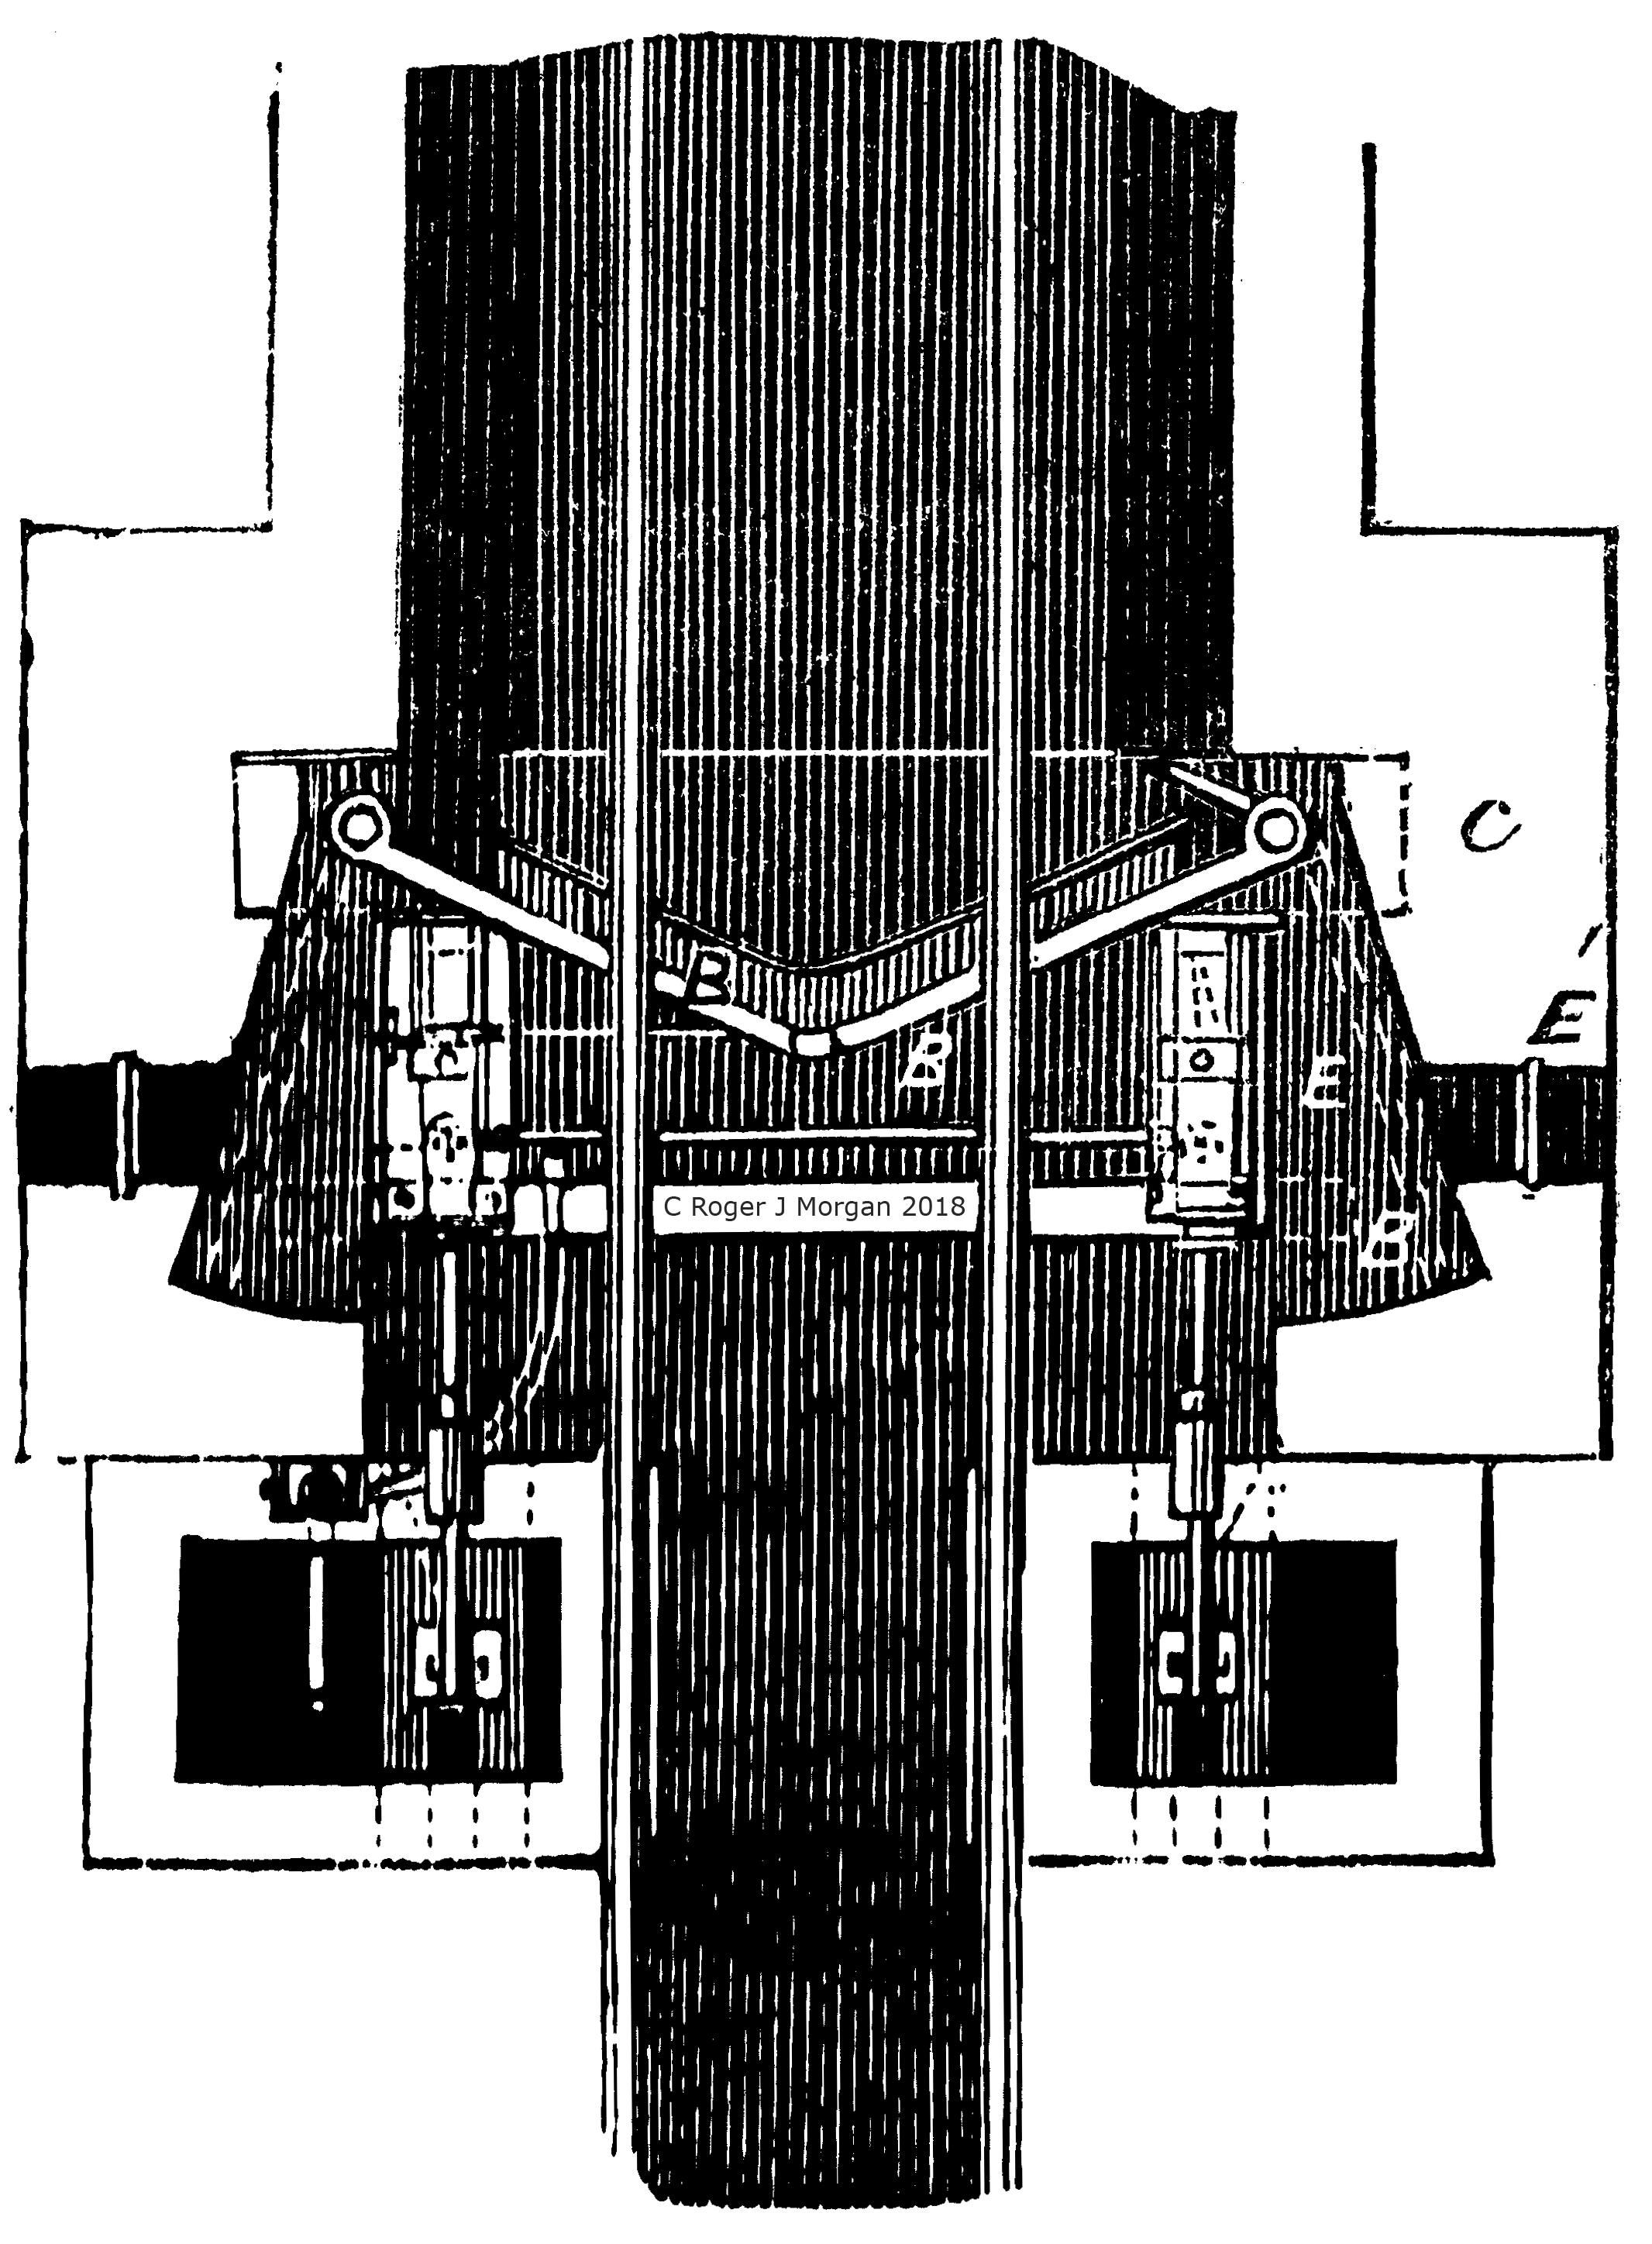 Rammell's patent drawing of the upper portal of the Crystal Palace Pneumatic Railway